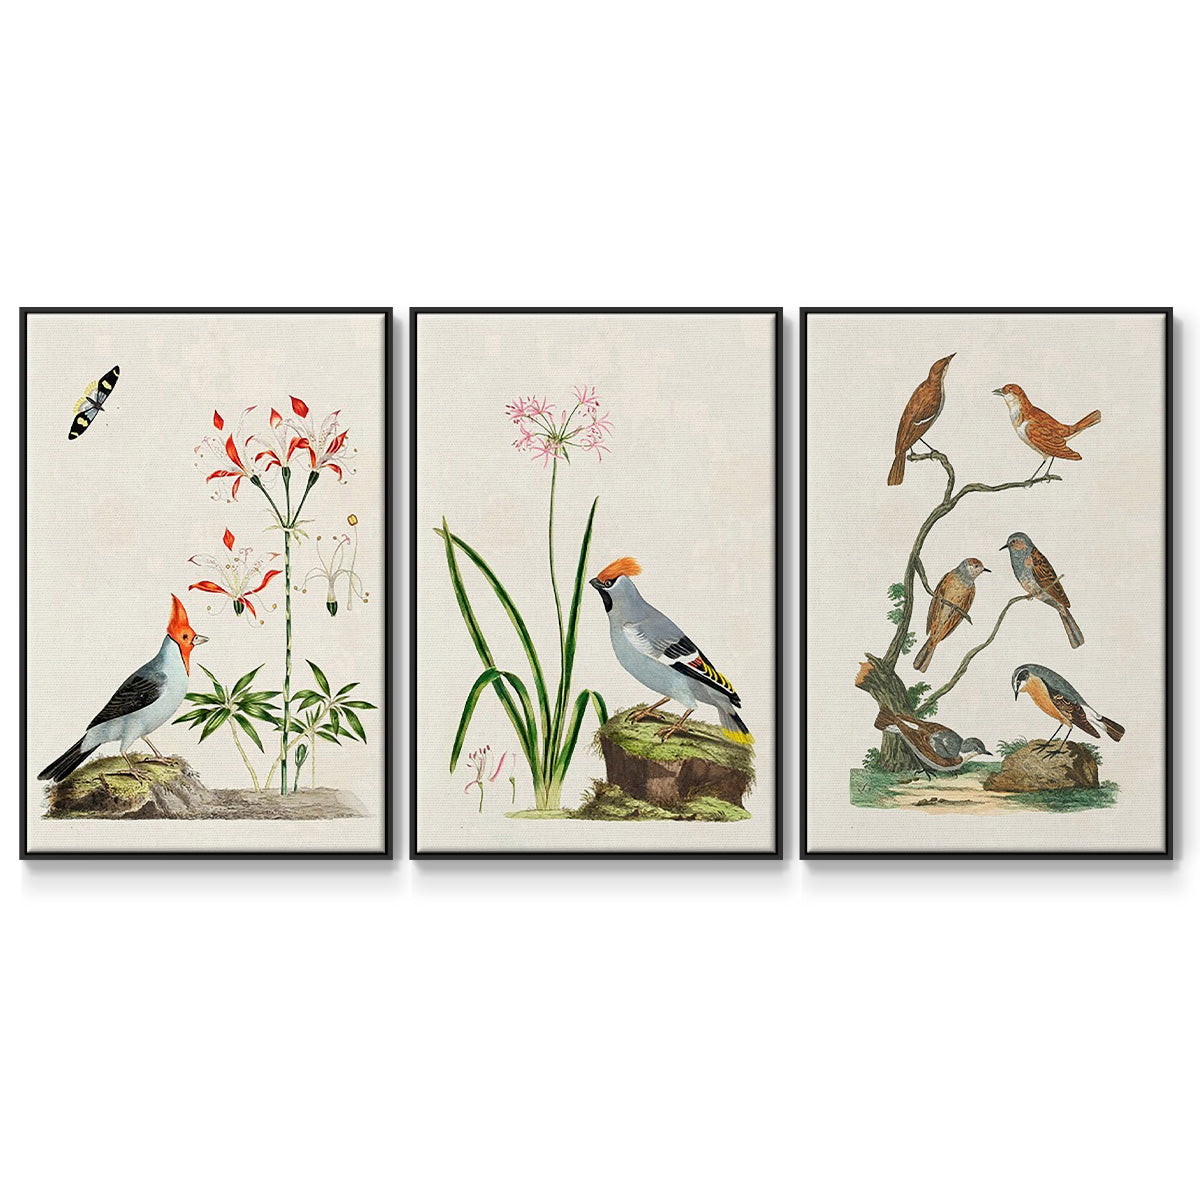 Antique Birds in Nature IV - Framed Premium Gallery Wrapped Canvas L Frame 3 Piece Set - Ready to Hang